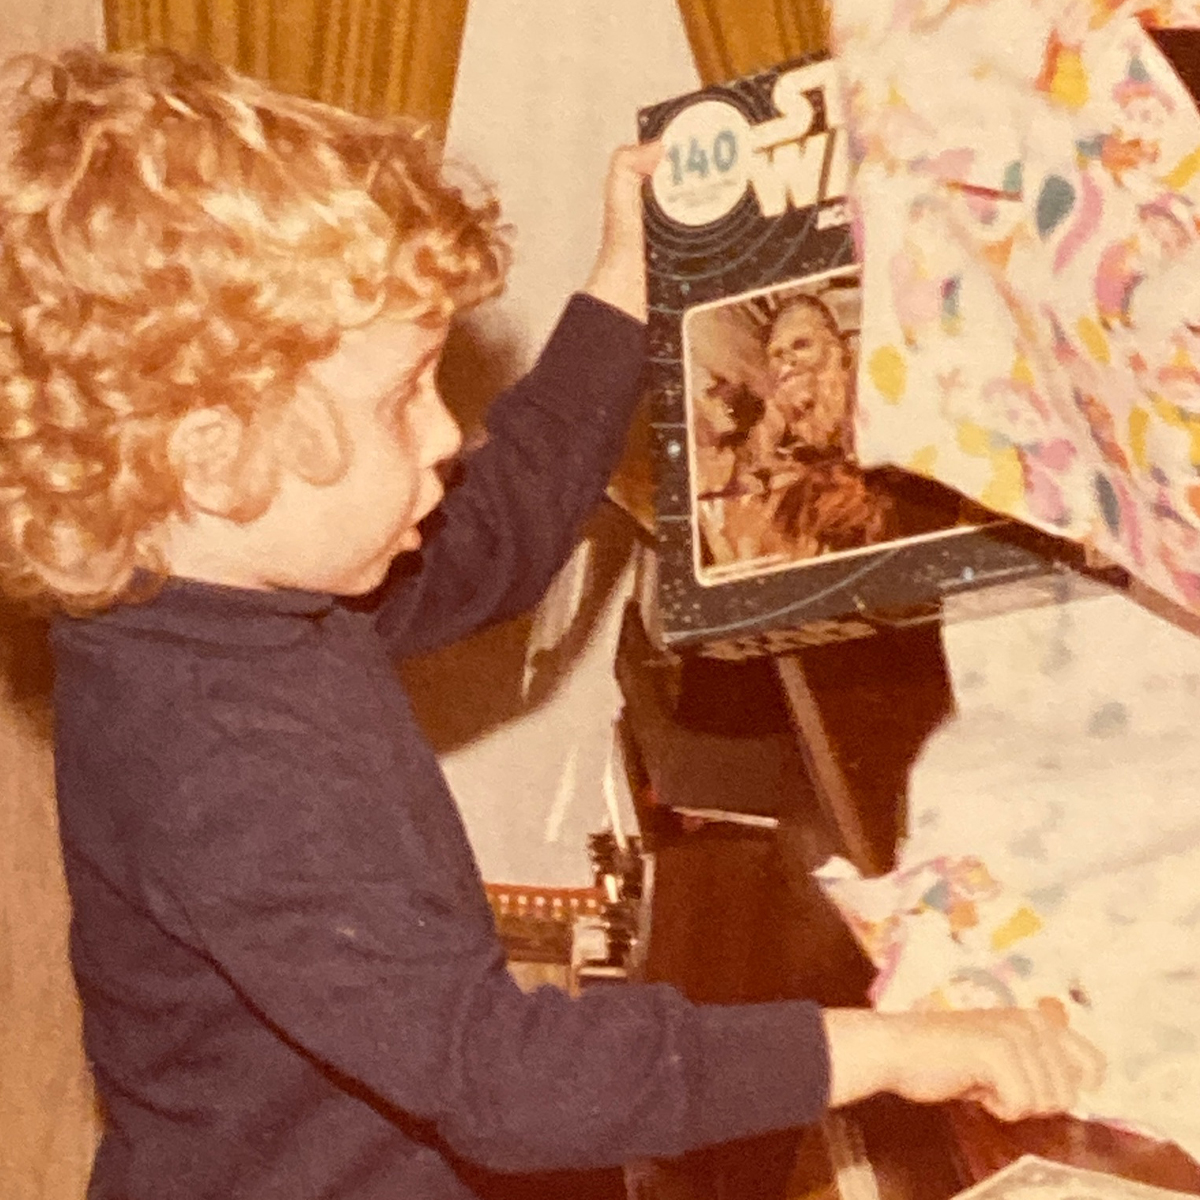 Before my 'Birthday Month' expires, I wanted to say thanks for your kind wishes. Having family & friends like you is the greatest gift I've ever been given. Well, except maybe for that Chewbacca puzzle I received in the 70's. It clearly influenced my personal style. #AdamAsher